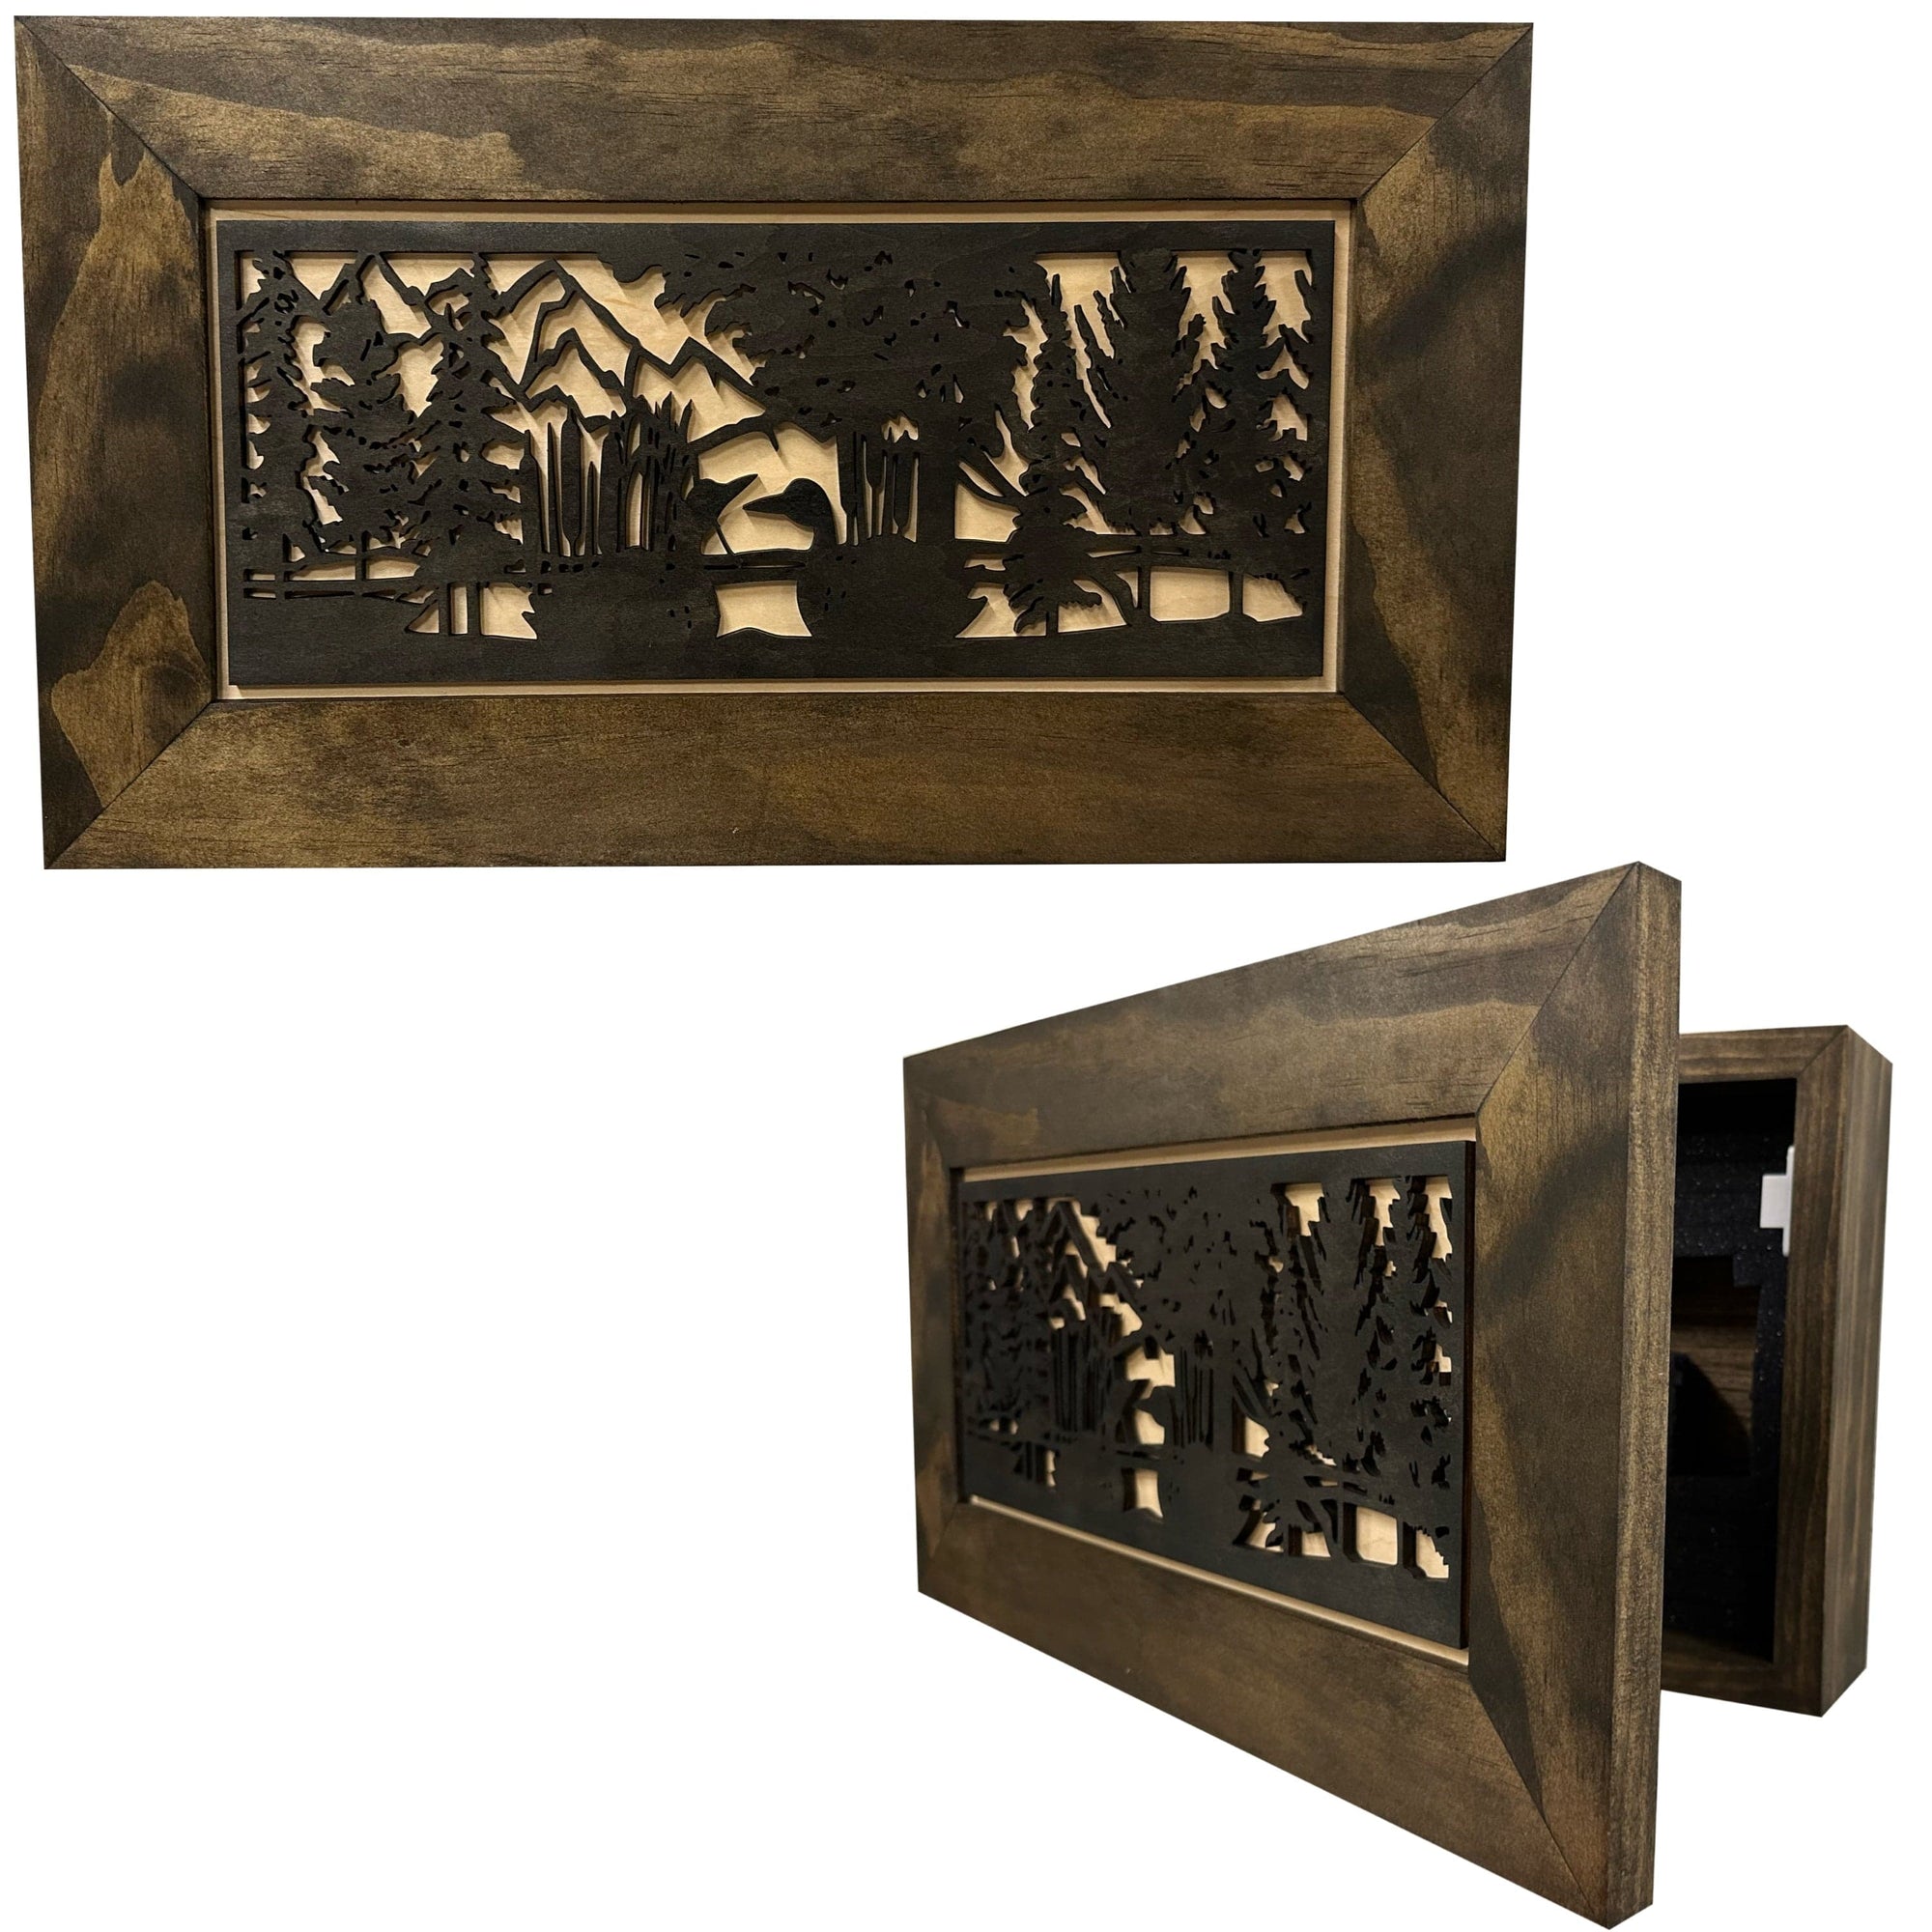 Wood Gun Cabinet Ducks On A Pond Wall Decoration - Hidden Gun Safe To Securely Store Your Gun In Plain Sight by Bellewood Designs Armadillo Safe and Vault